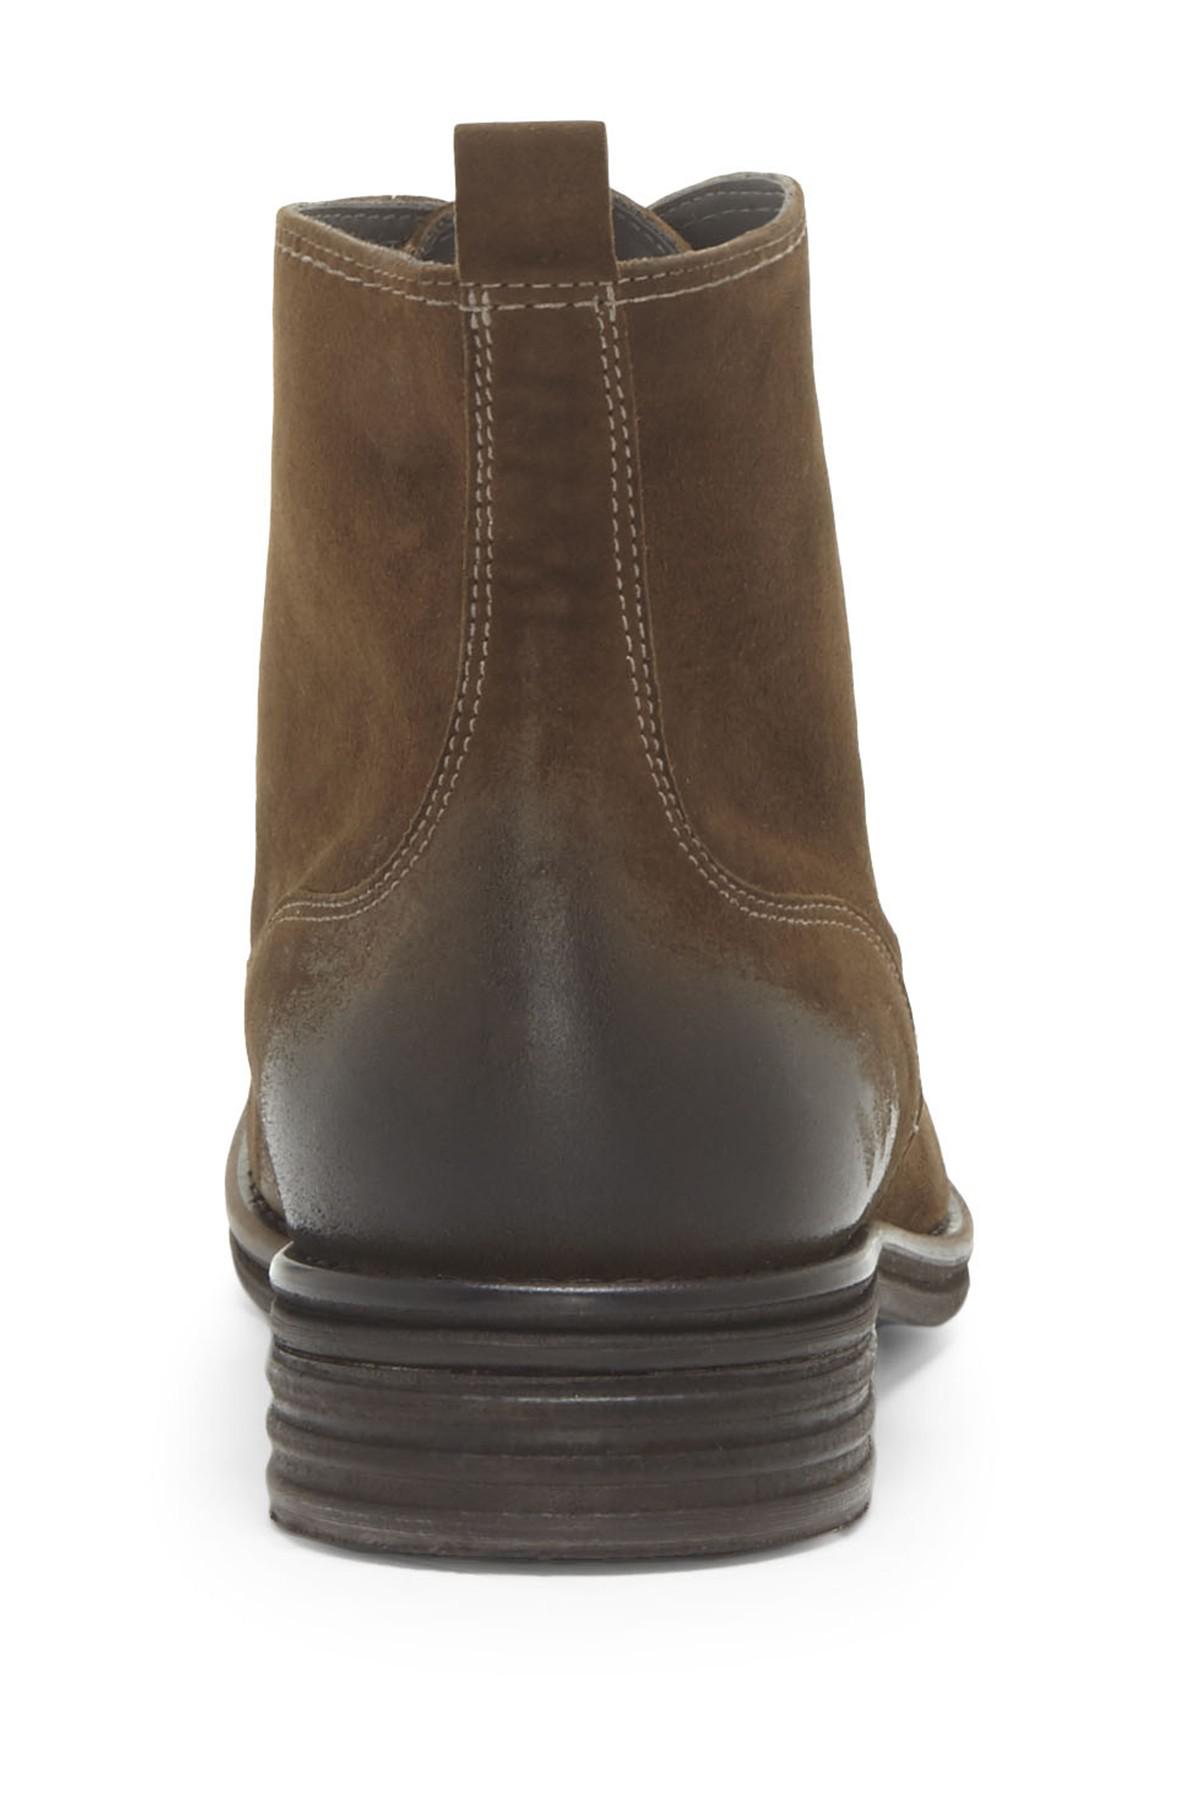 vince camuto cordie boot